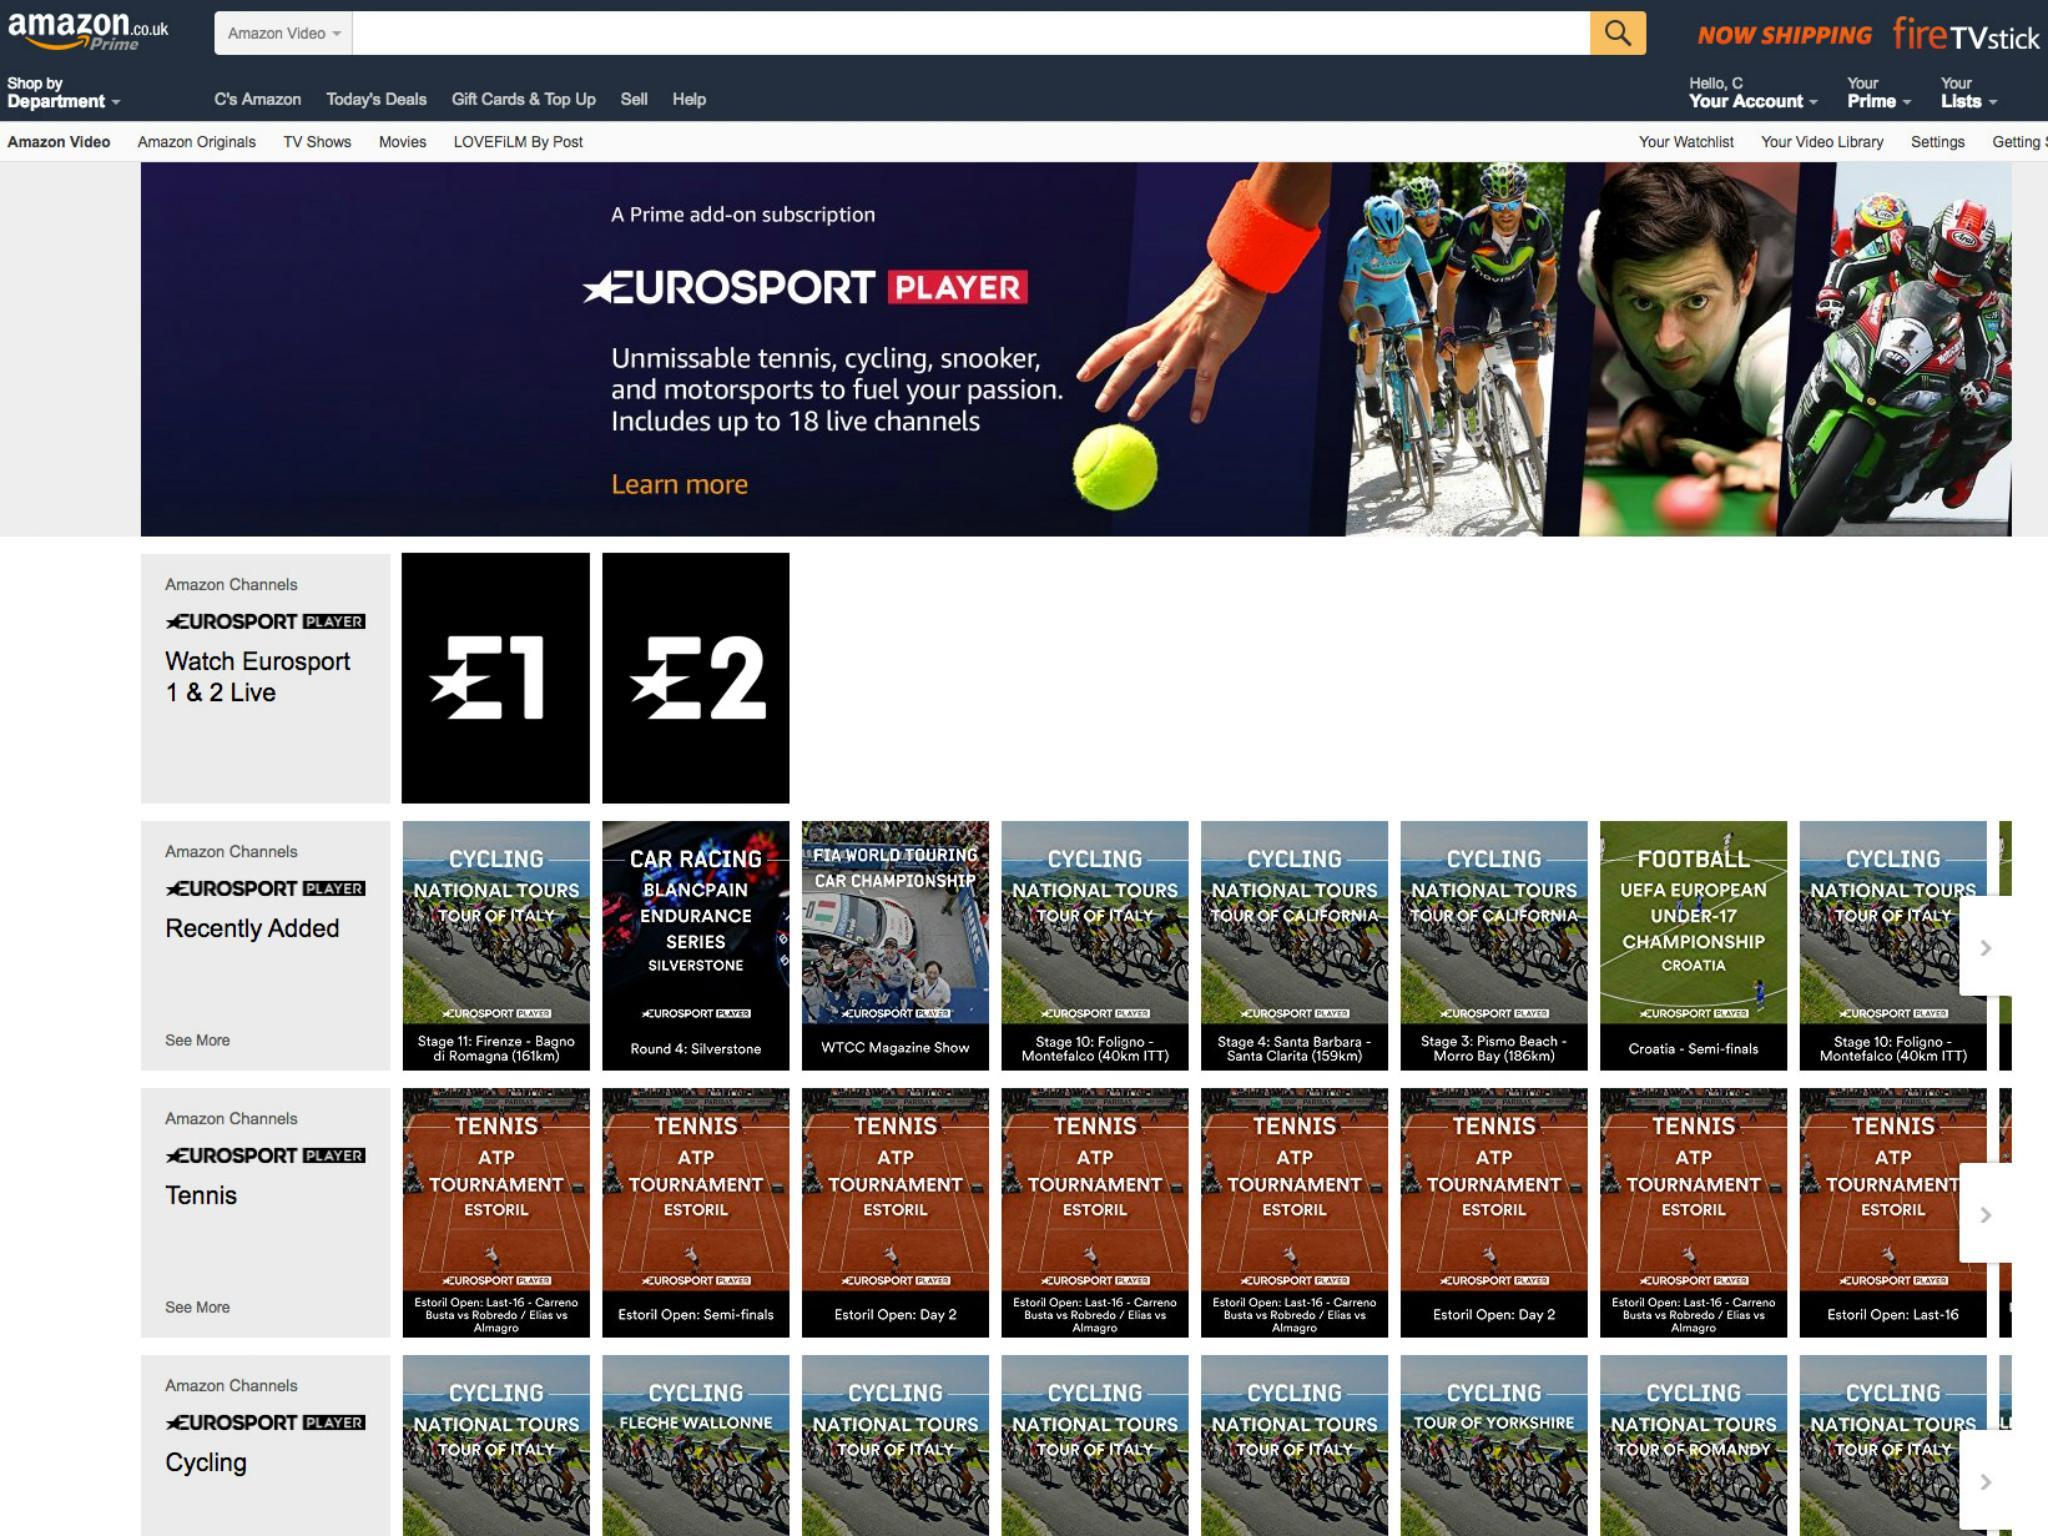 Amazon Channels Unbundled live sport comes to Prime Video The Independent The Independent